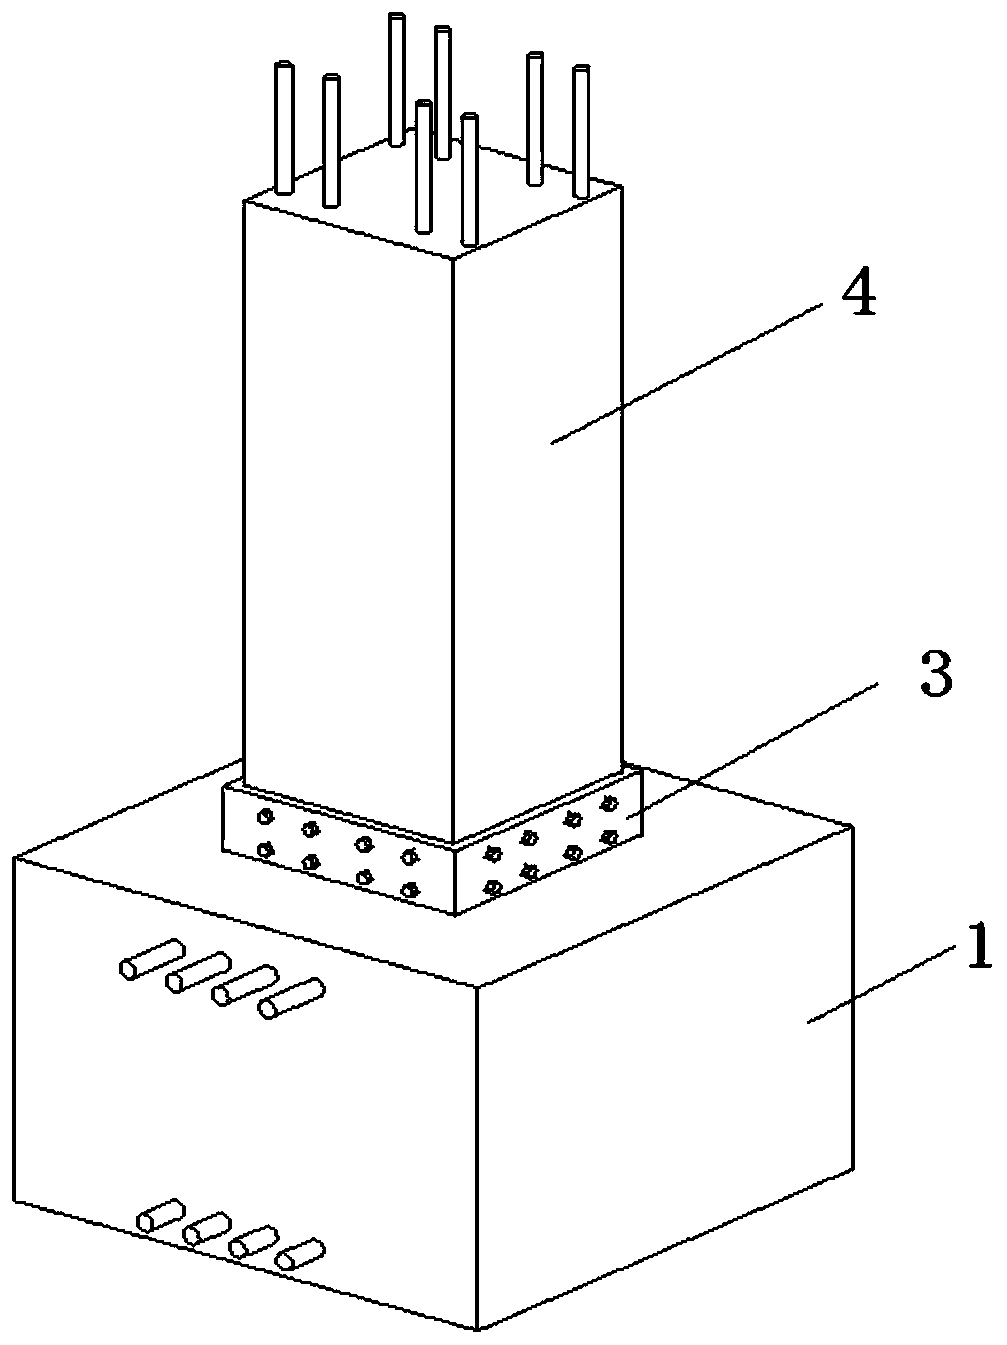 Steel-wood combined vibration isolation pad foundation and mounting method thereof